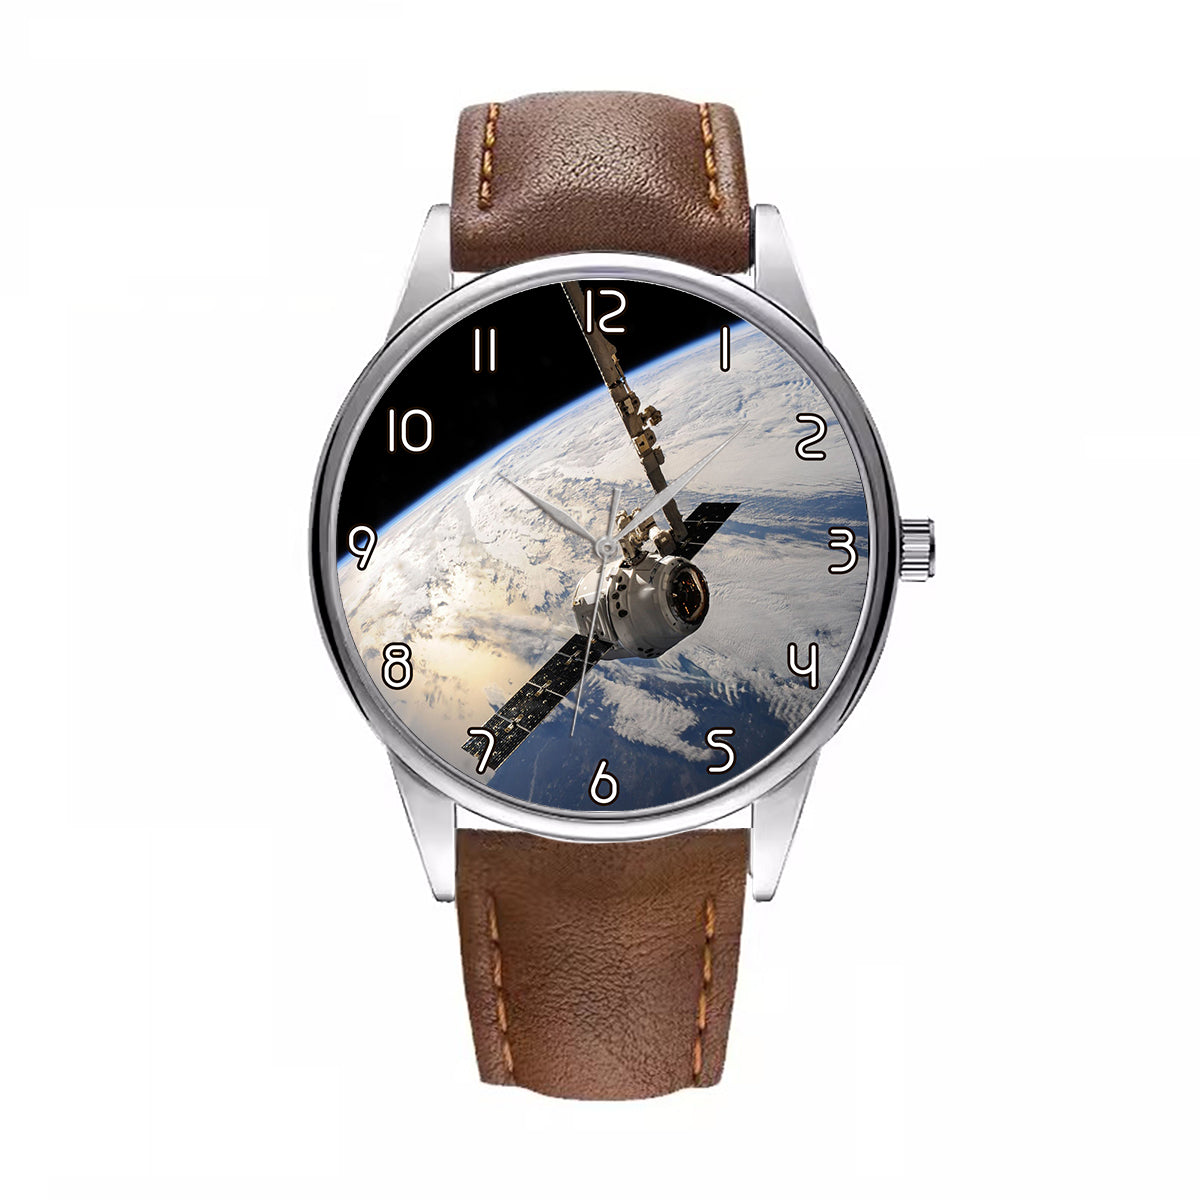 Airplane Flying over Big Buildings Designed Fashion Leather Strap Watches